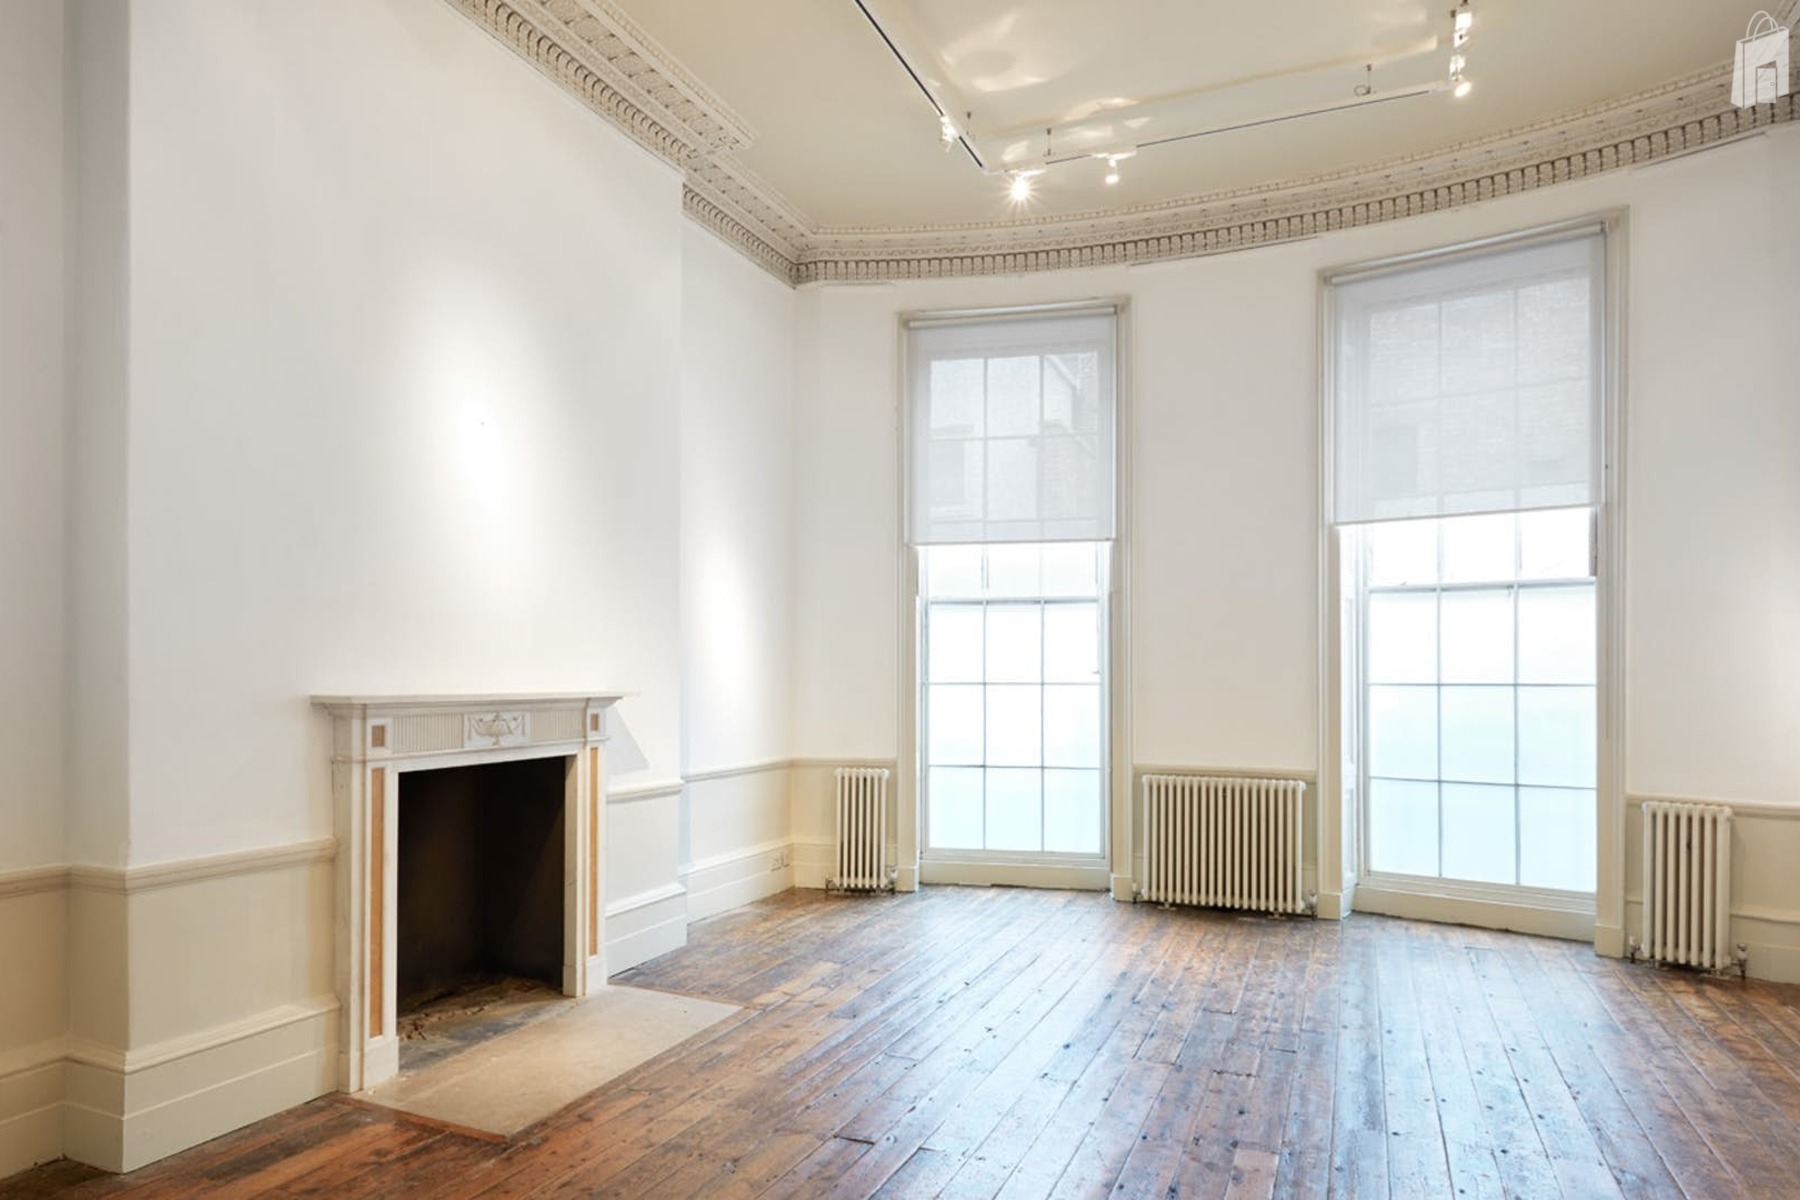 Gallery Space in Fitzrovia